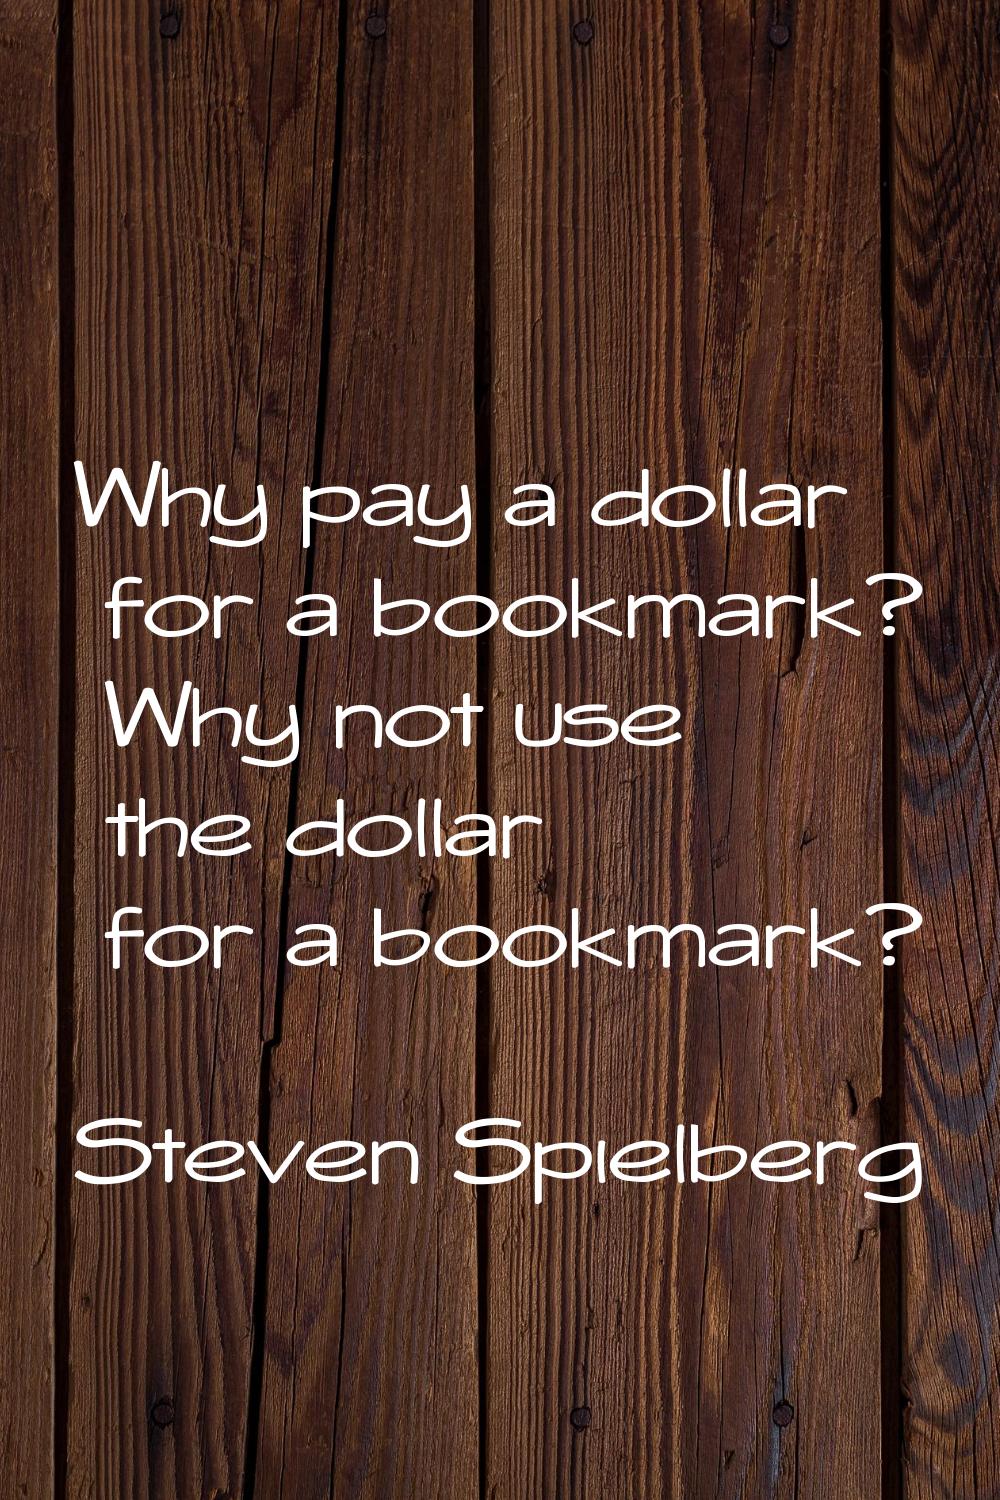 Why pay a dollar for a bookmark? Why not use the dollar for a bookmark?